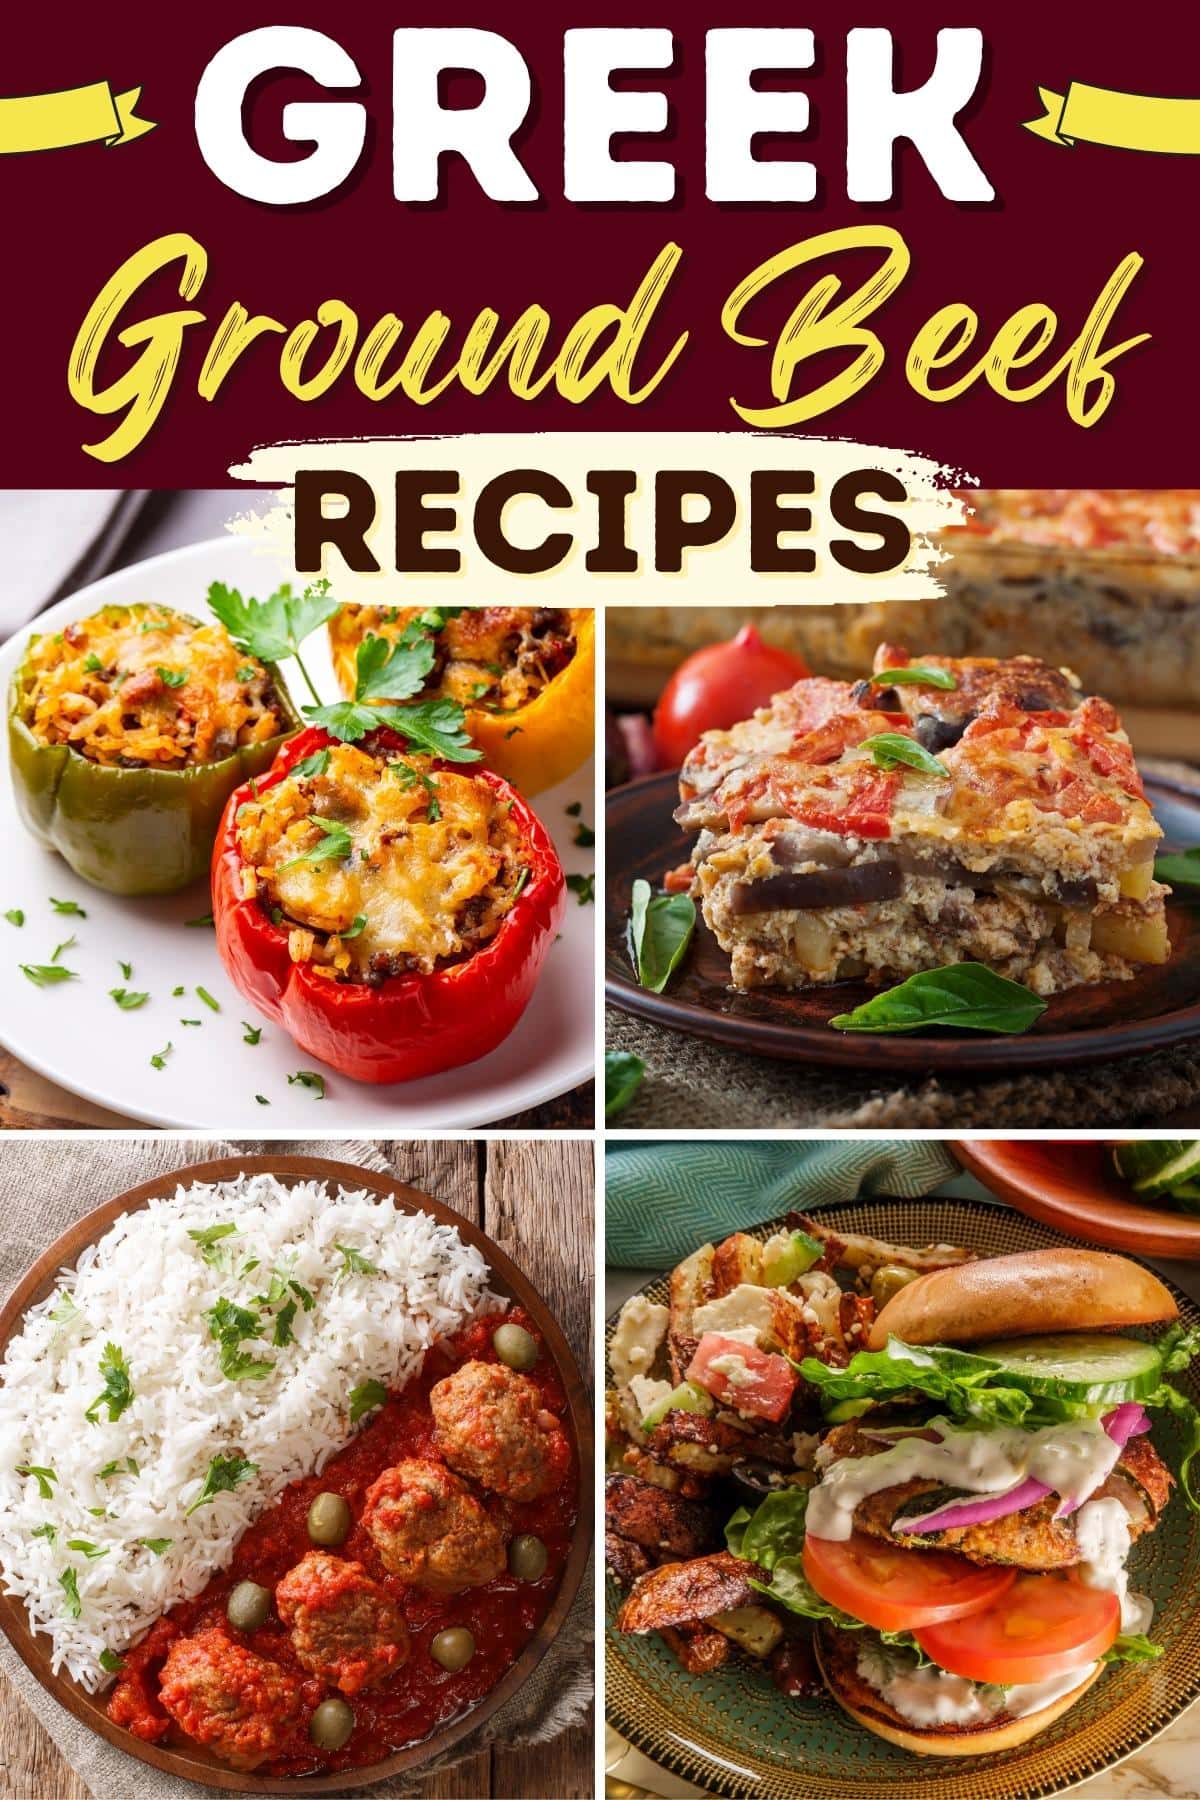 10 Greek Ground Beef Recipes (Easy Mediterranean Dishes) - Insanely Good